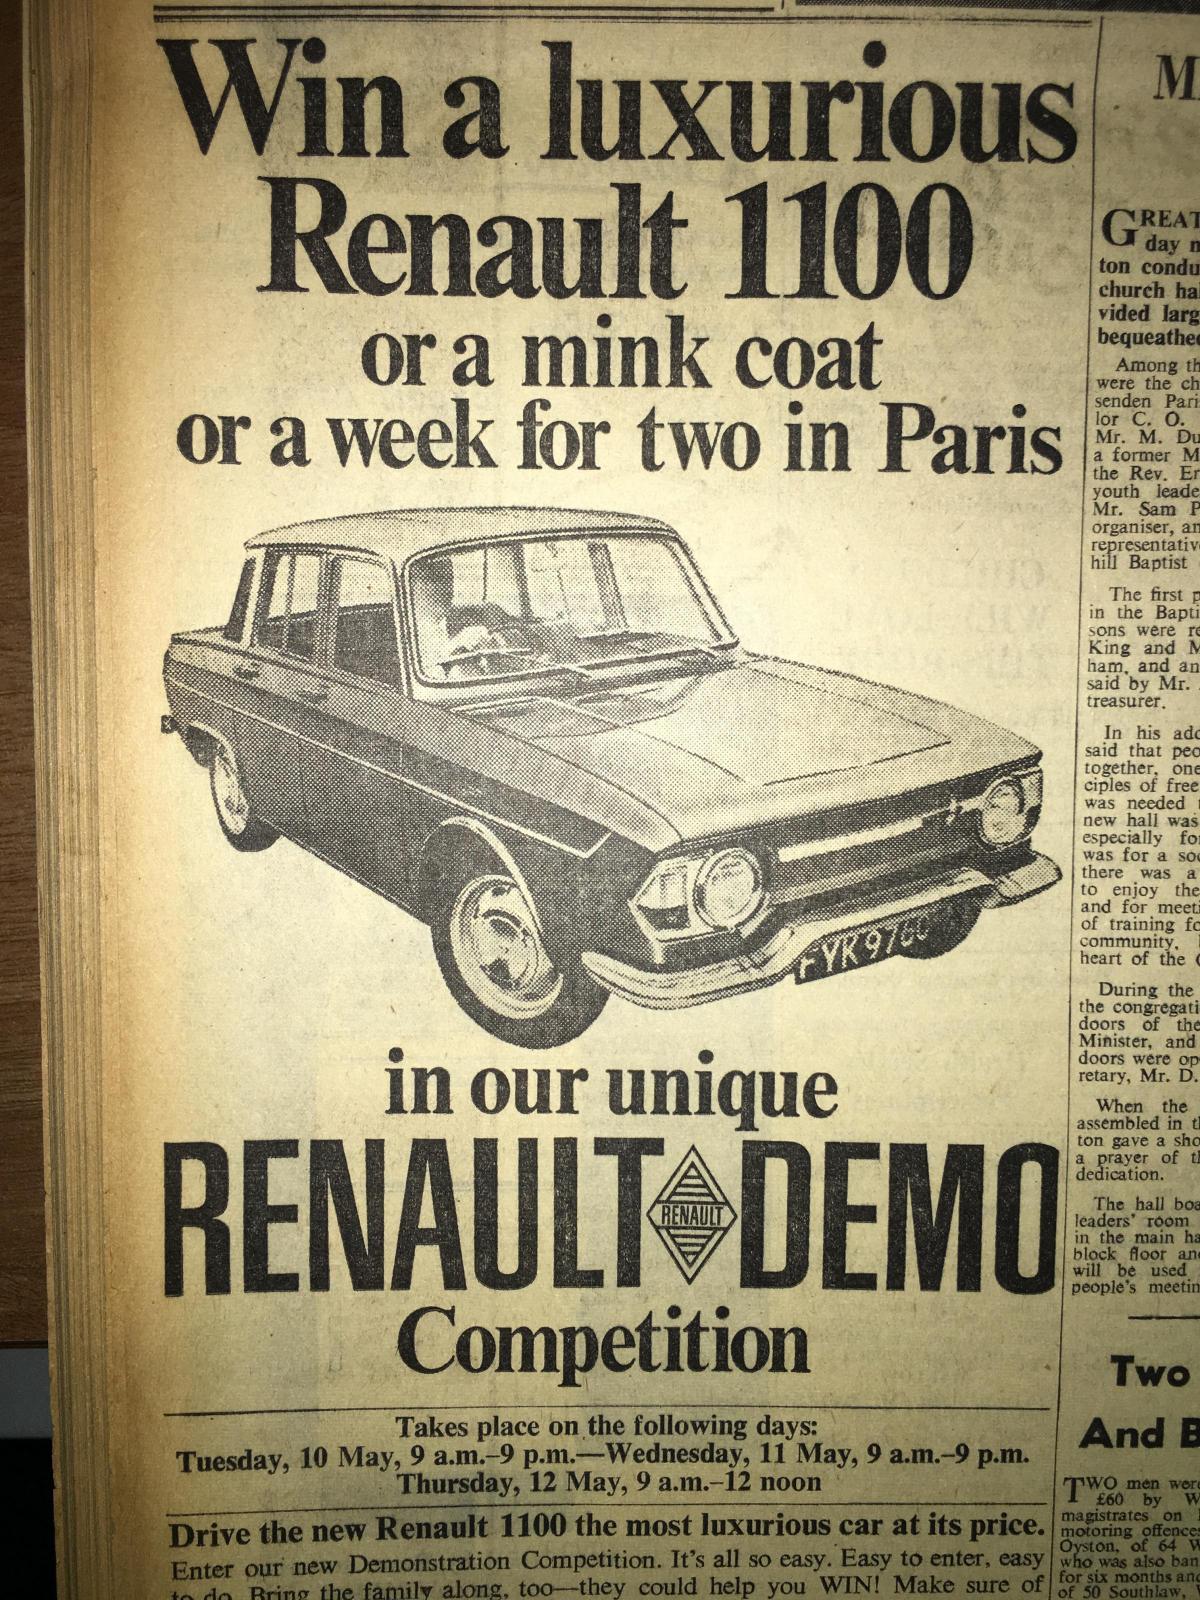 Prize: Win a car, mink coat, or a week for two in Paris